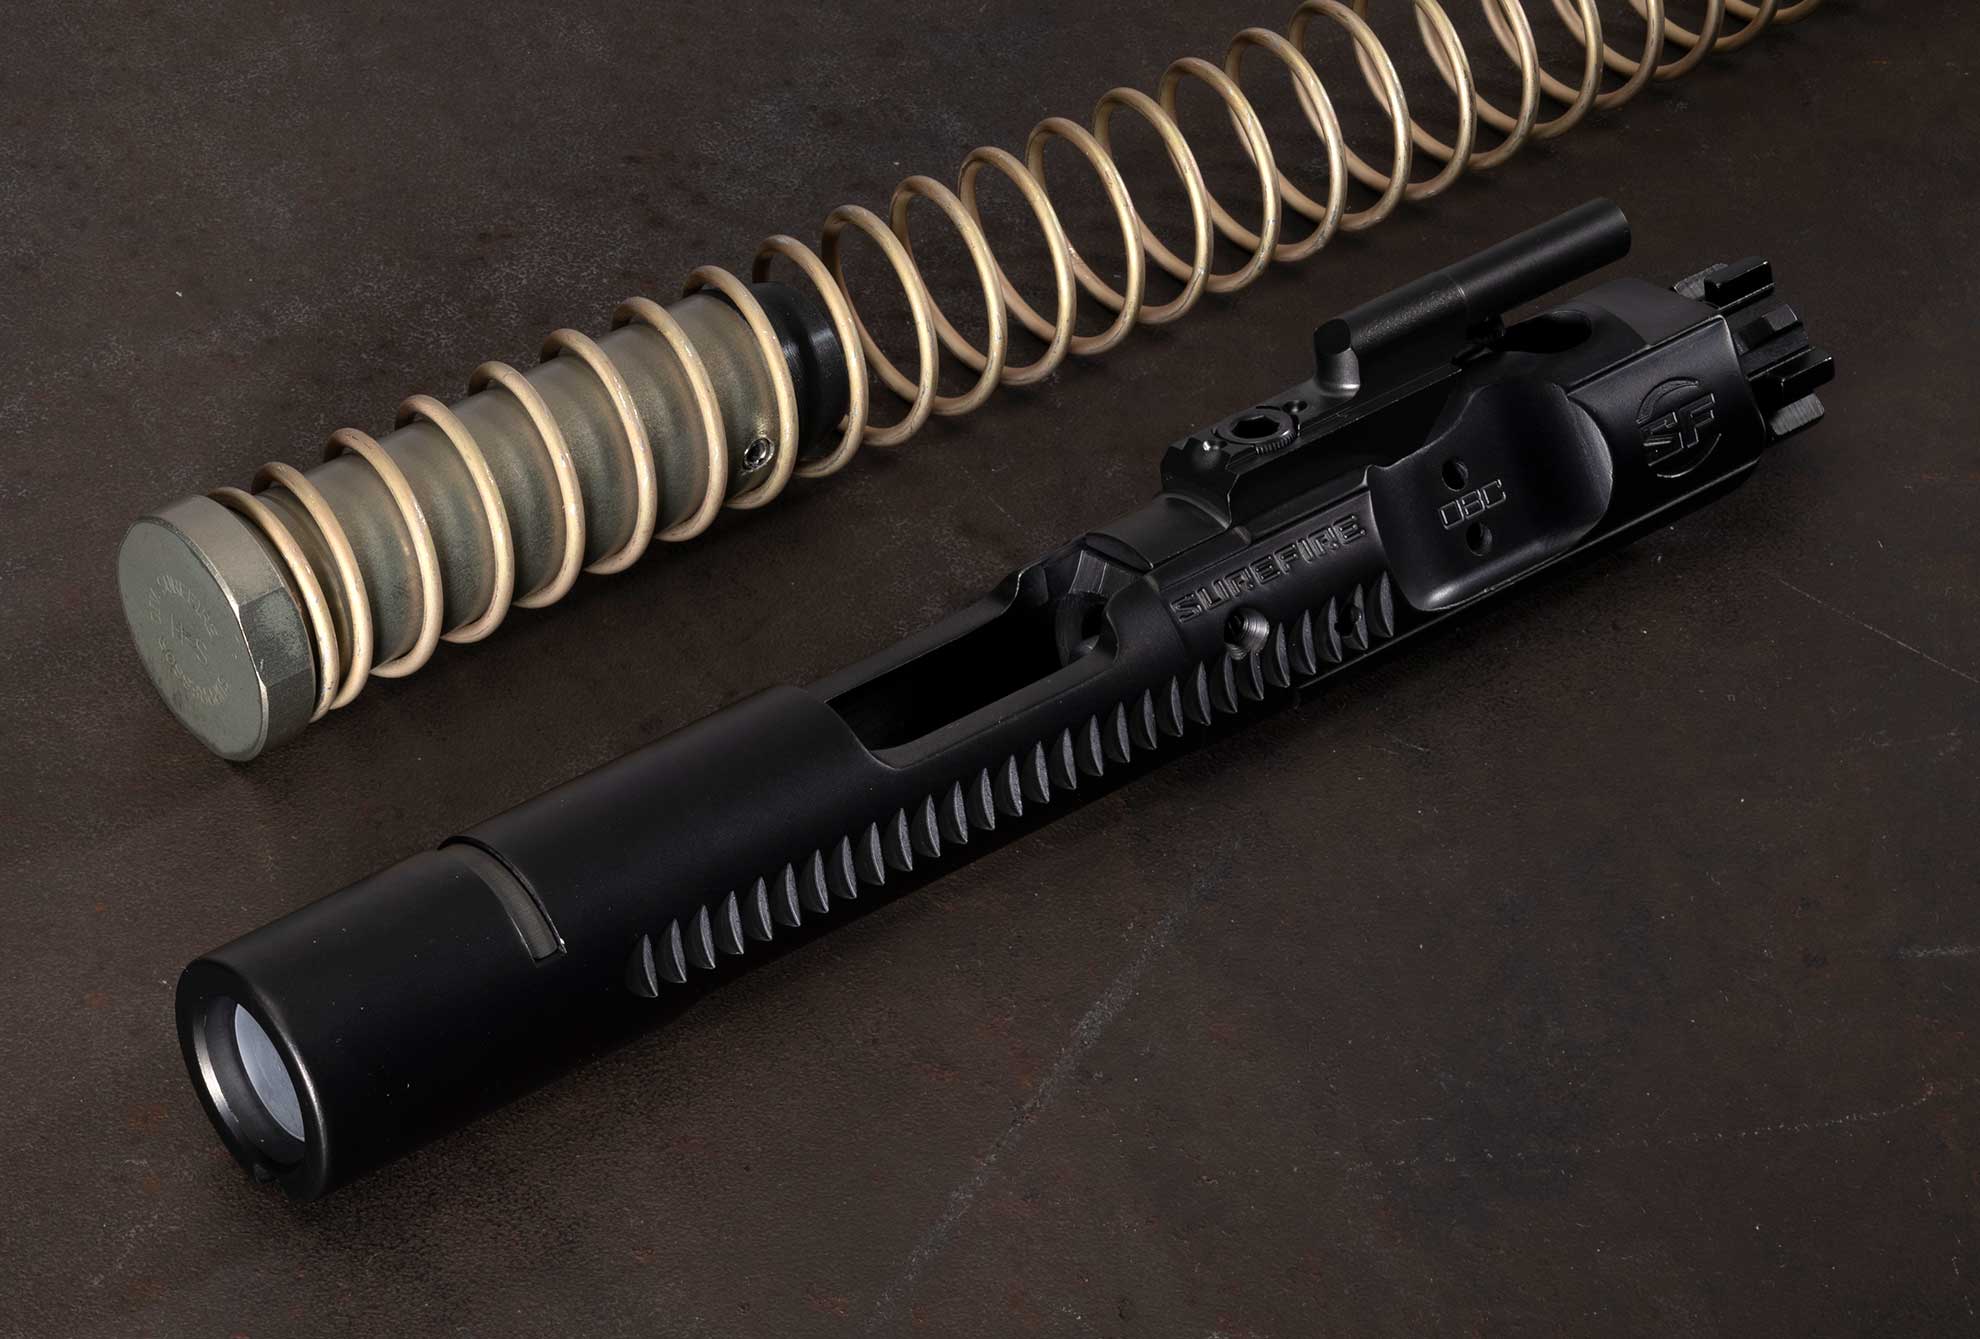 SureFire OBC Optimized Bolt Carrier Group with SureFire buffer and SureFire spring